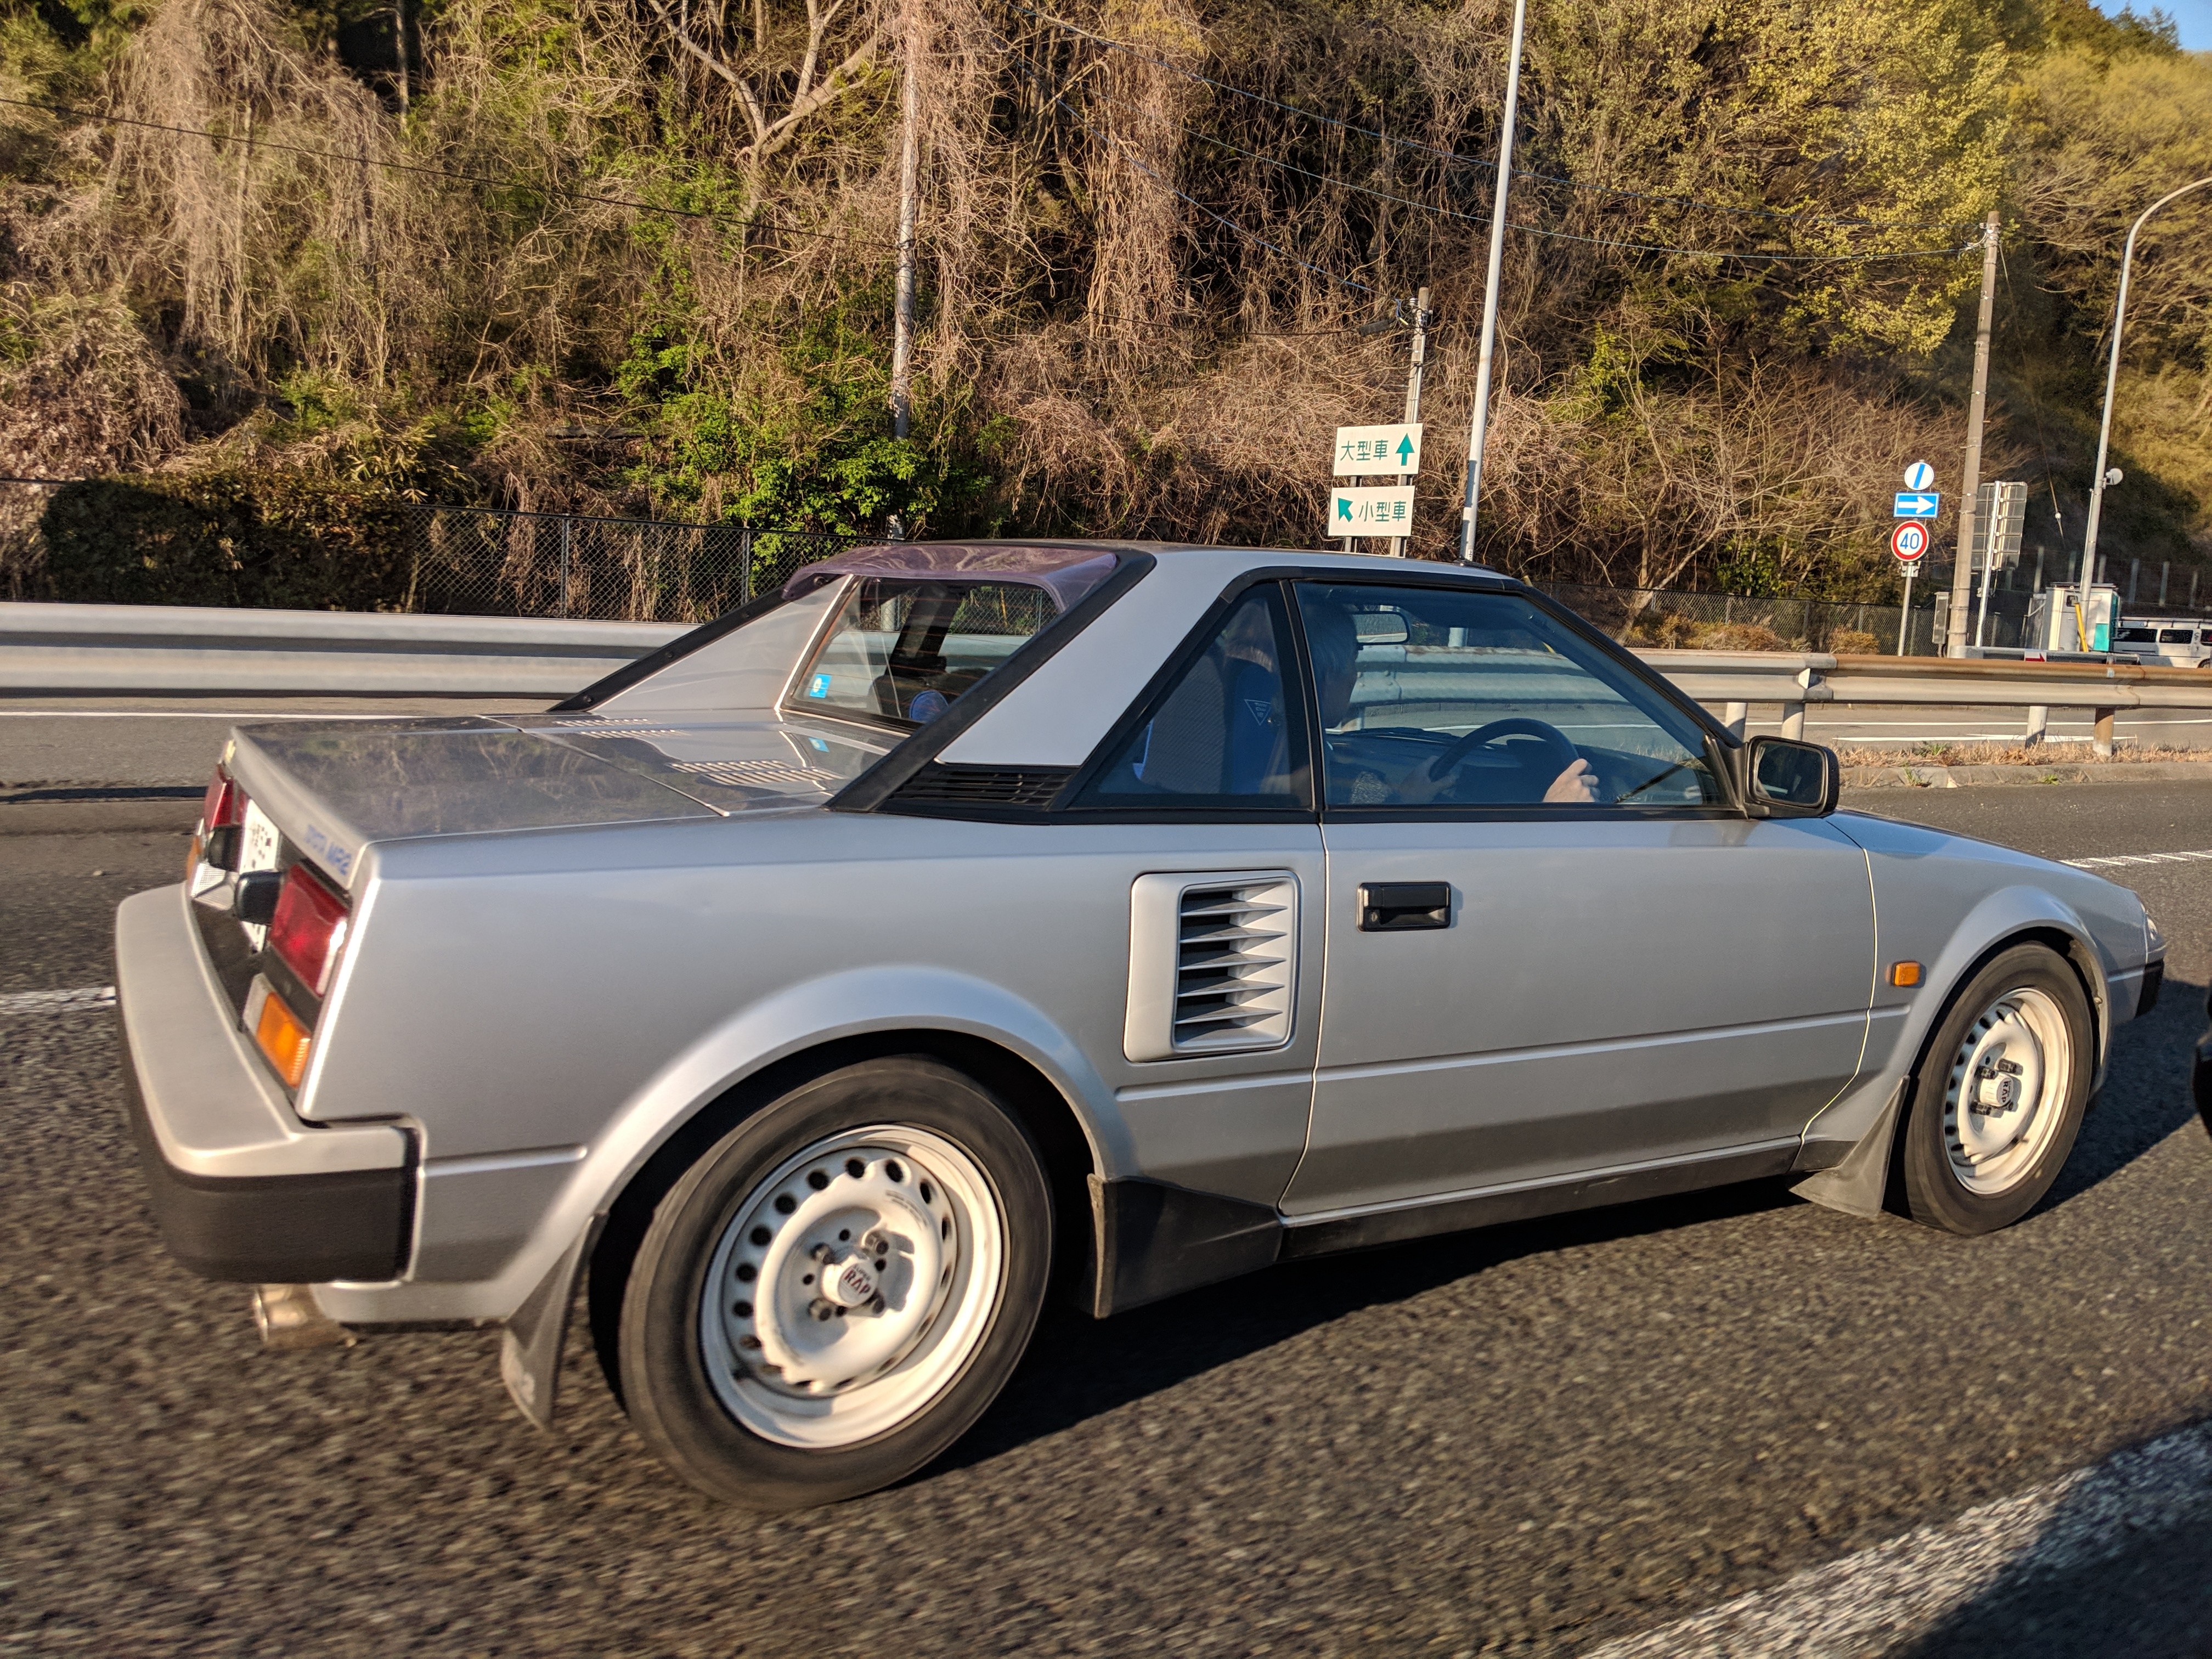 Bonus MR2 pic Seri snapped during our drive back to Tokyo!